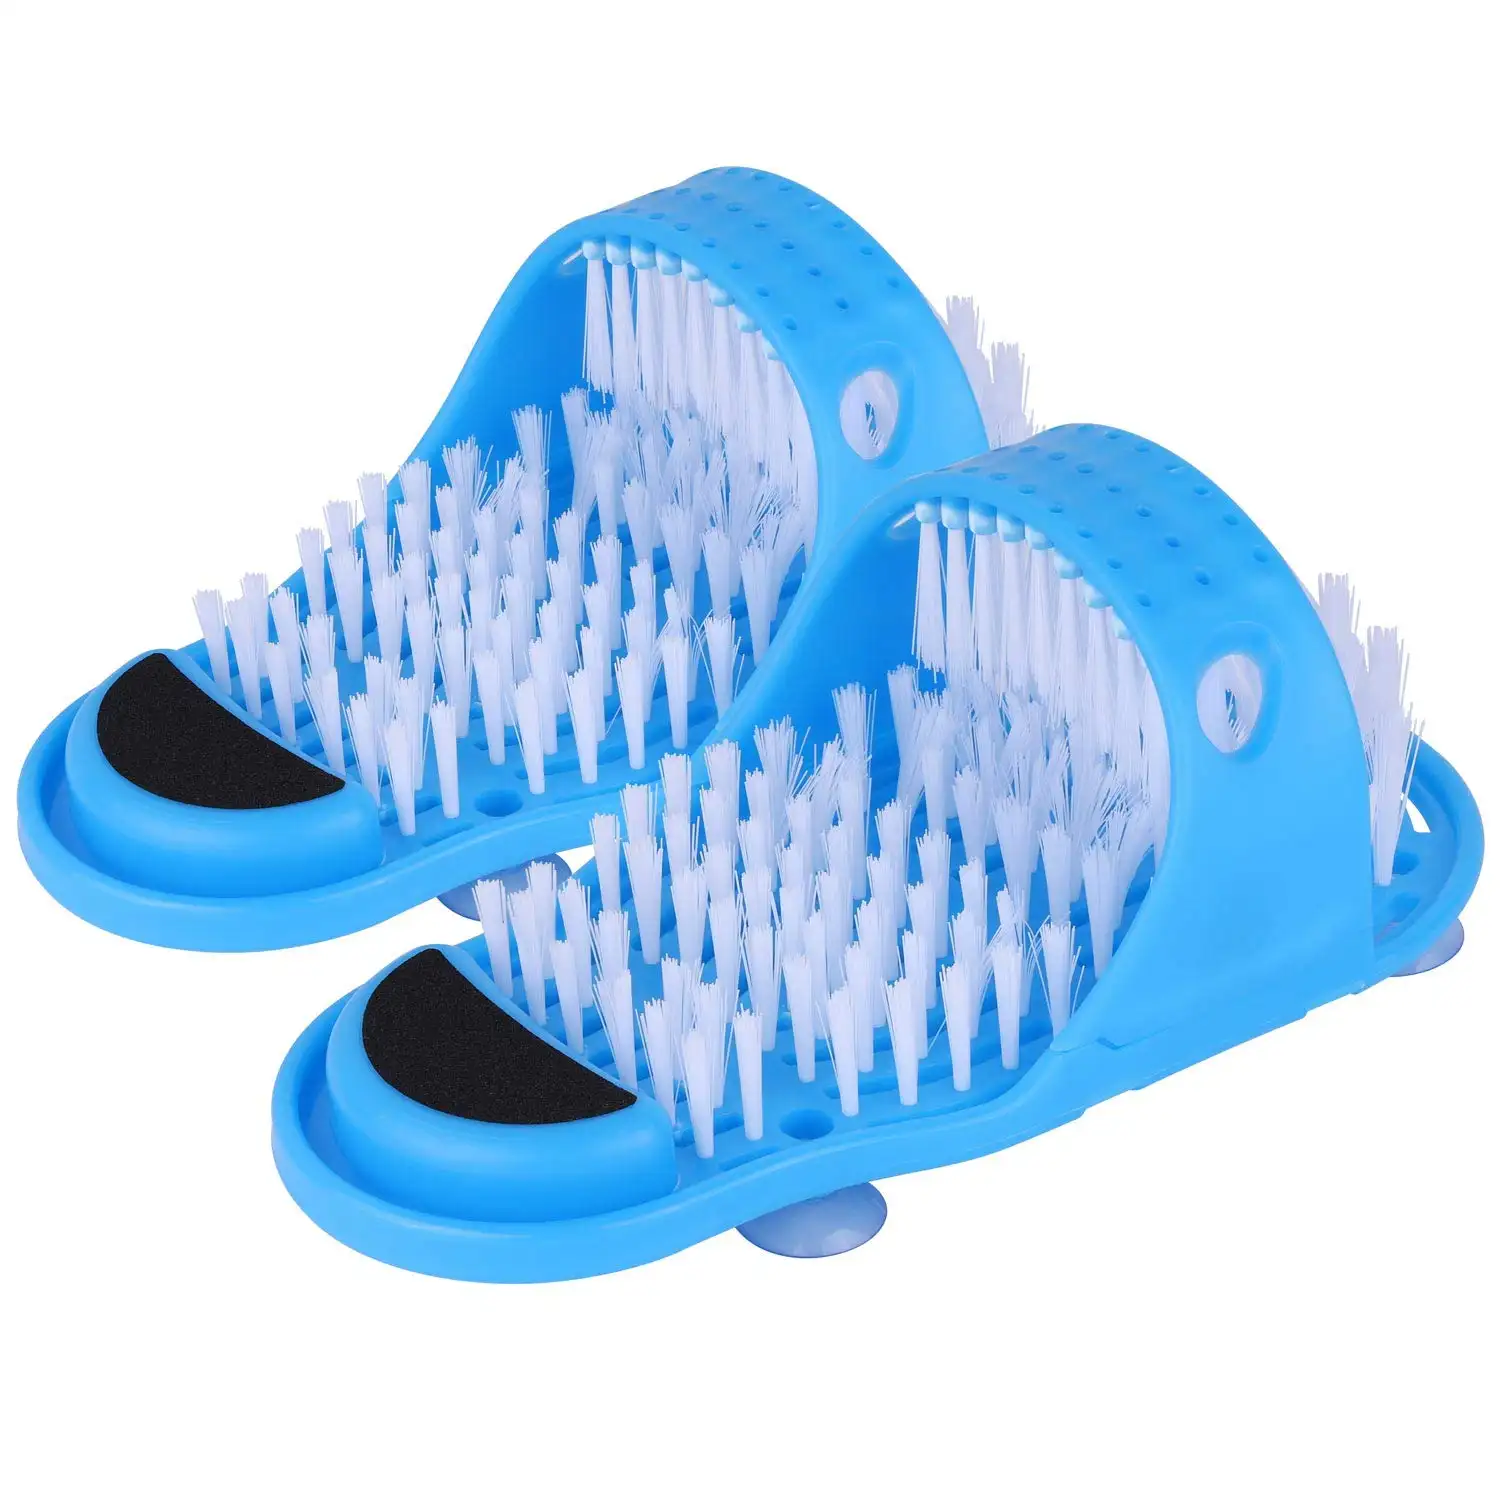 7044Magic Foot Scrubber Feet Cleaner Washer Brush for Shower Floor Spas Massage, Slipper for Exfoliating Cleaning Foot 1 Pair